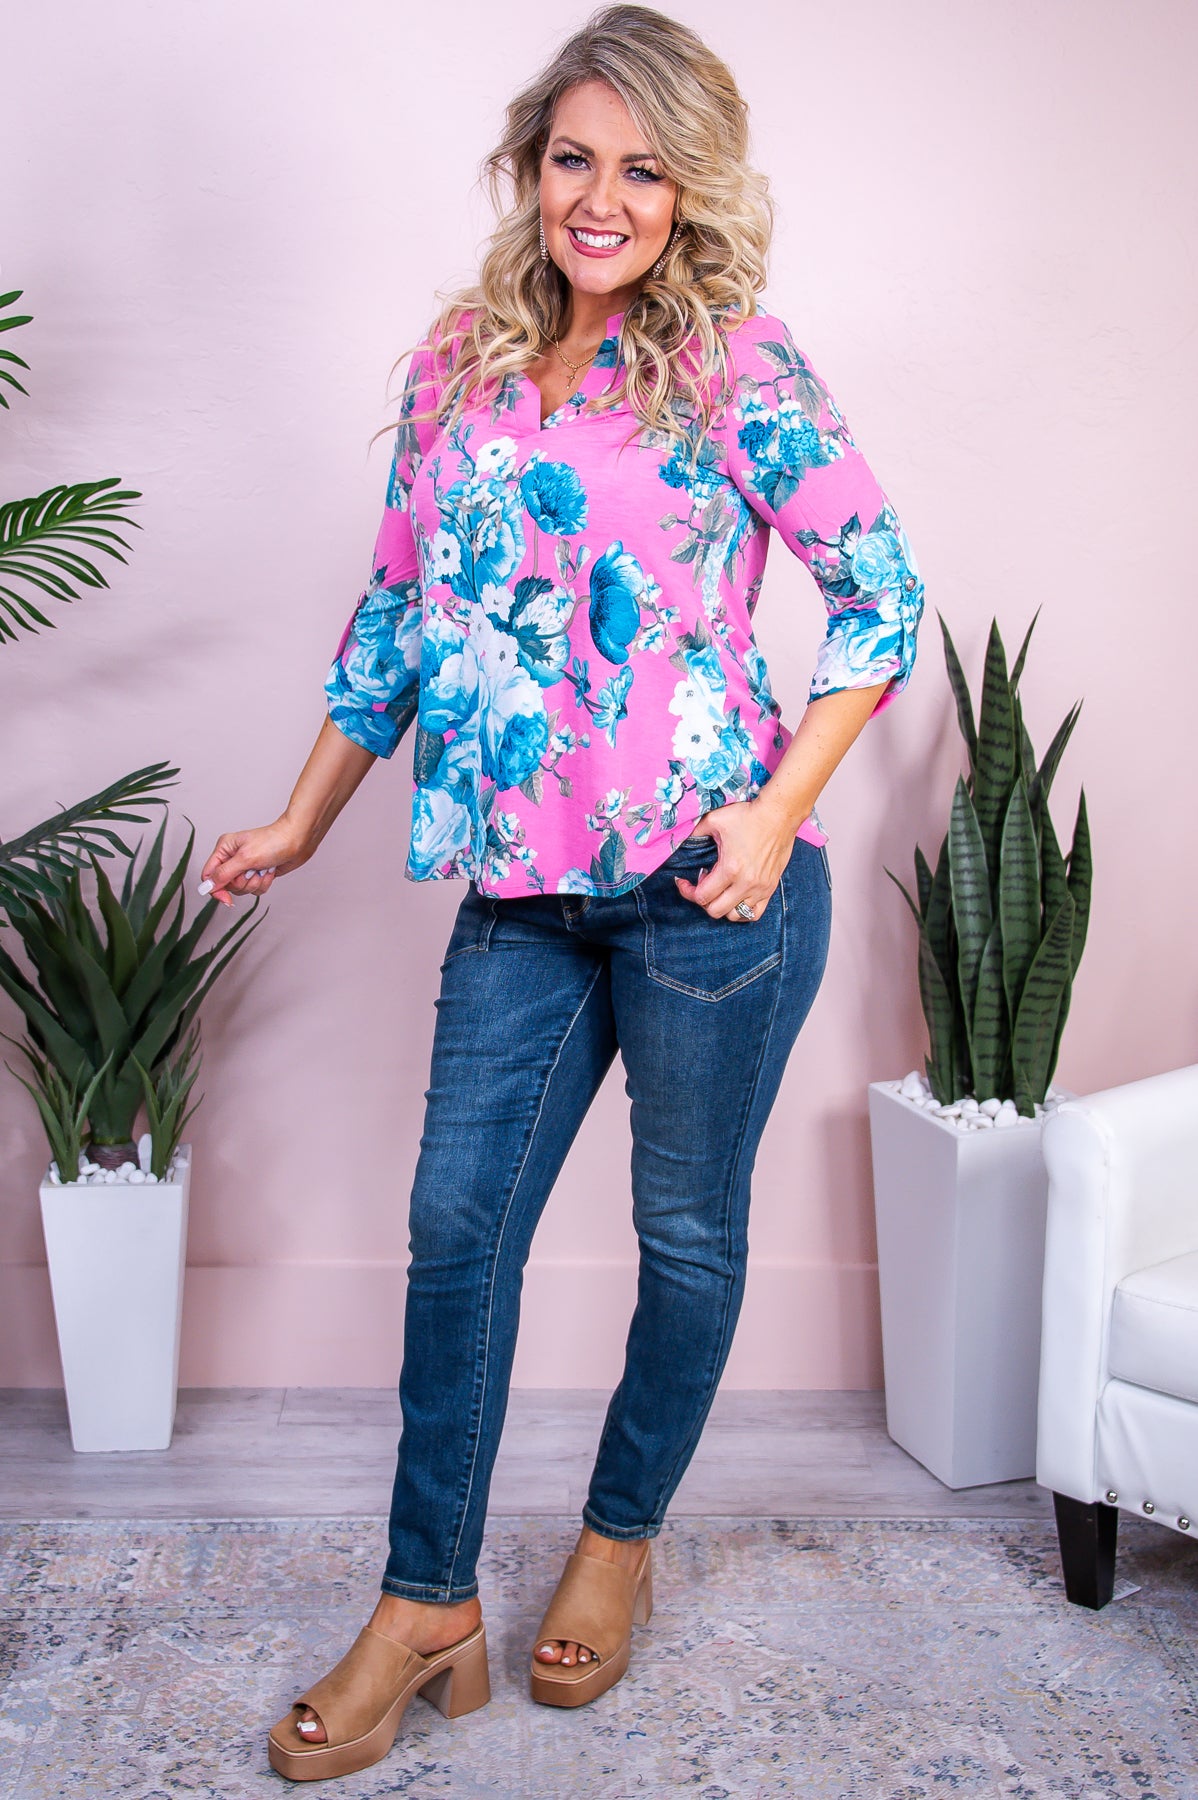 Dazzling In Pink Pink/Blue Floral Top - T9846PK